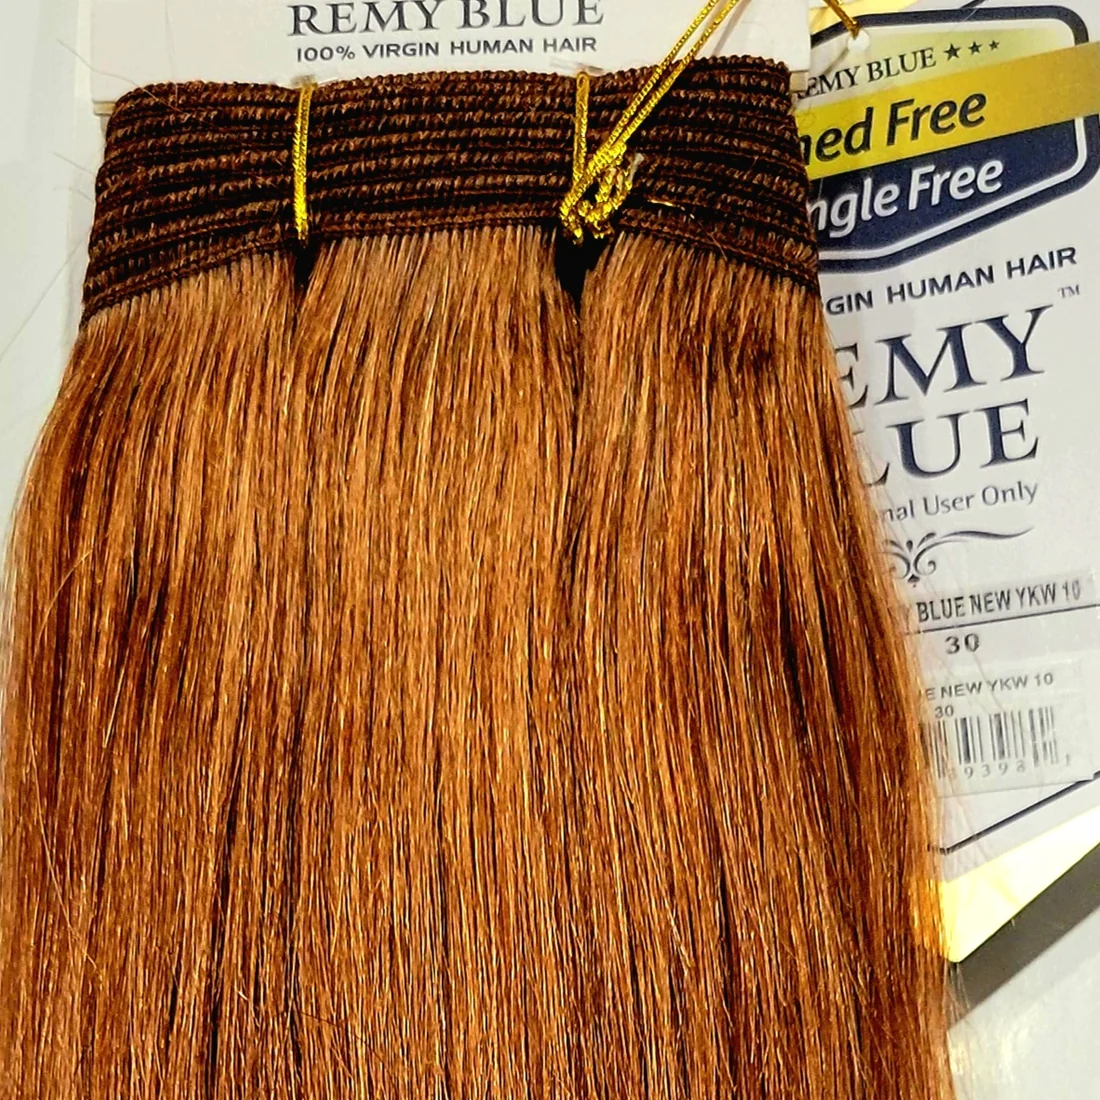 Remy Blue Human Hair New Yaky 18"